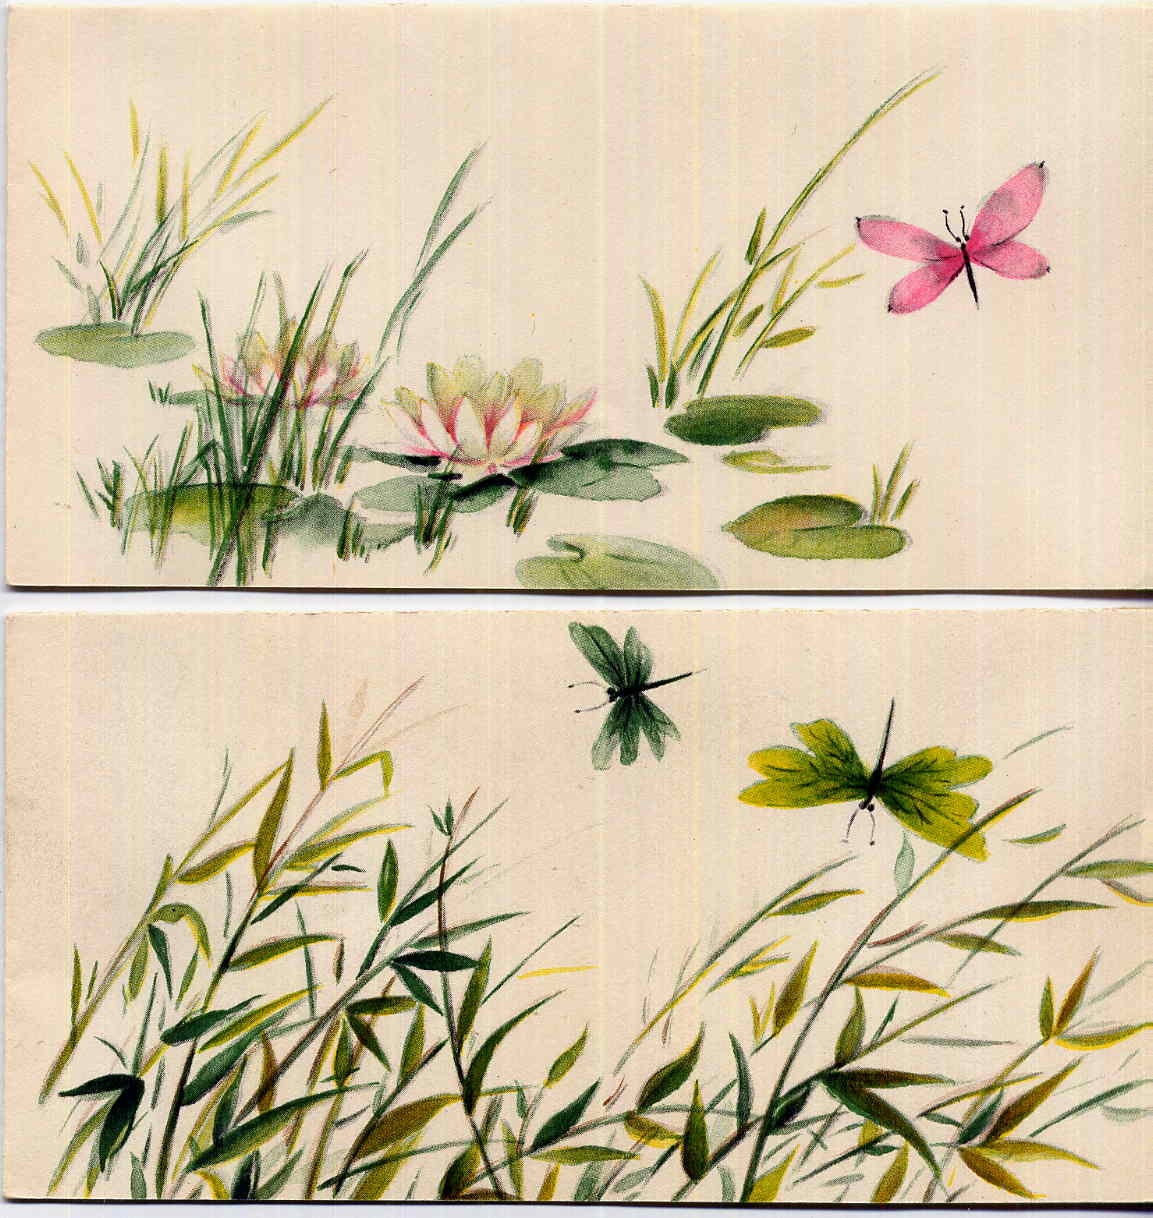 Vintage Dragonfly Butterfly Small Note Cards Set of 4 Hallmark Foldover Small Size with Envelopes 2.5" by 5"